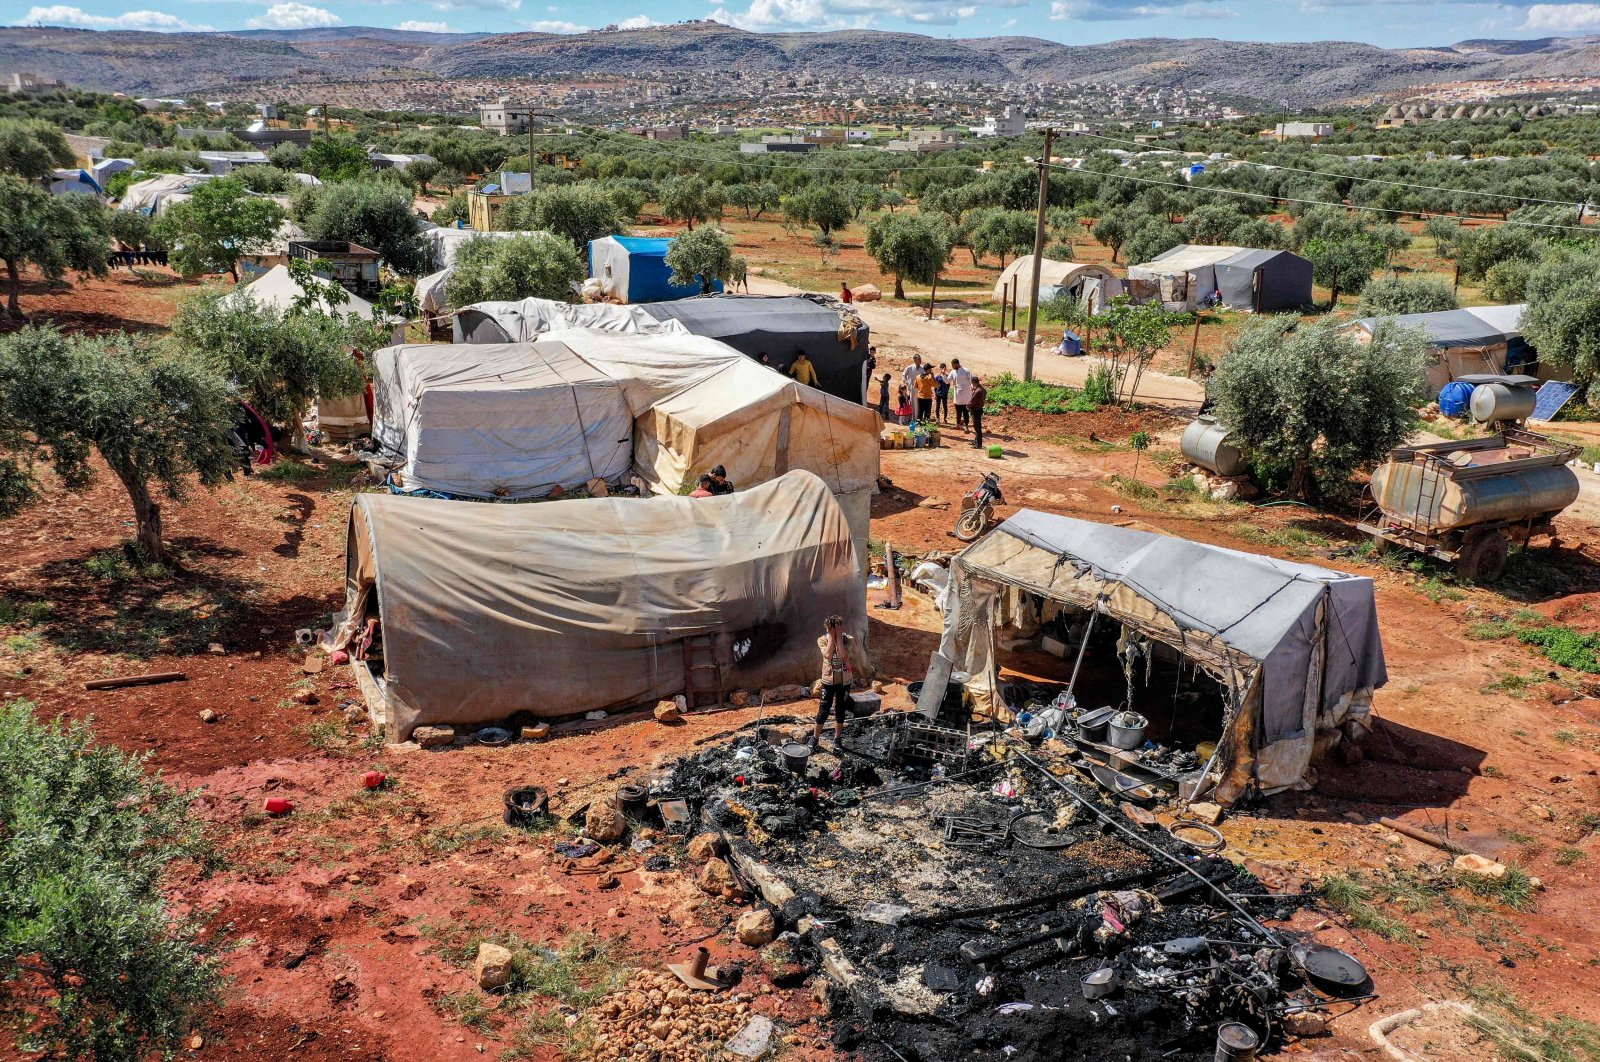 This picture taken on May 7, 2022, shows an aerial view of a young Syrian standing near the remains of a burnt-down tent following a fire caused by the malfunctioning battery of a solar panel, at a camp for Syrians displaced by the conflict near the village of Haranbush in the opposition-held part of the northwestern province of Idlib province. (AFP Photo)